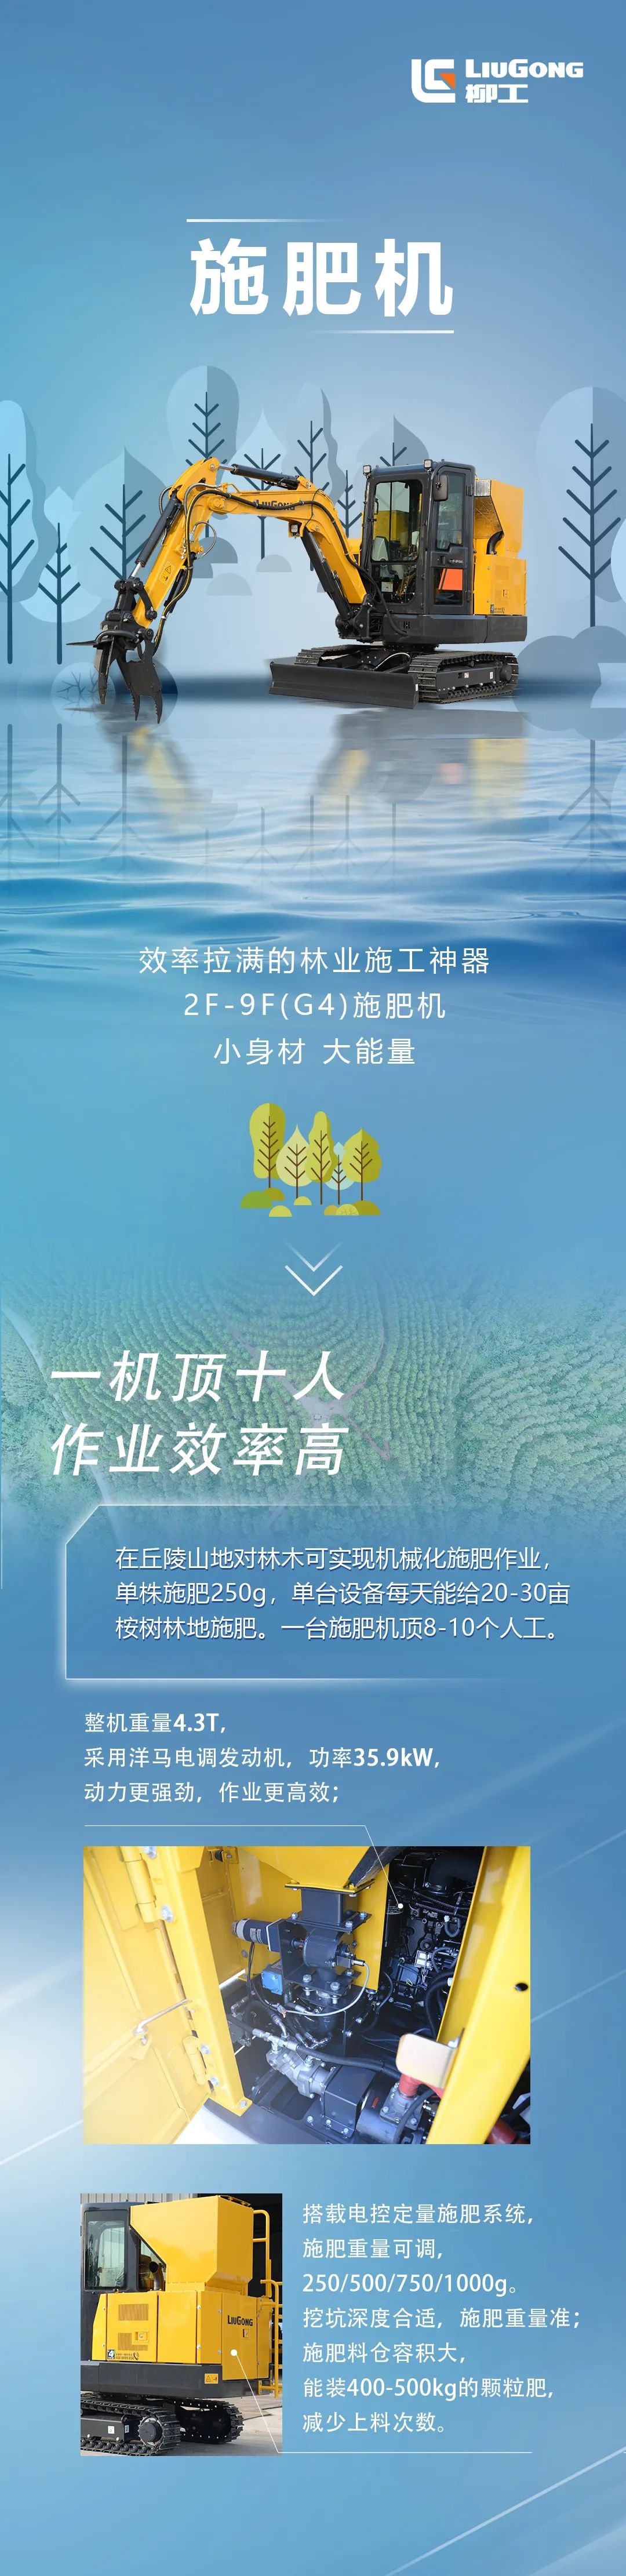 Huaihua City's Qijiang Dai Autonomous County do a good job of four articles to promote scientific education to improve quality and efficiency